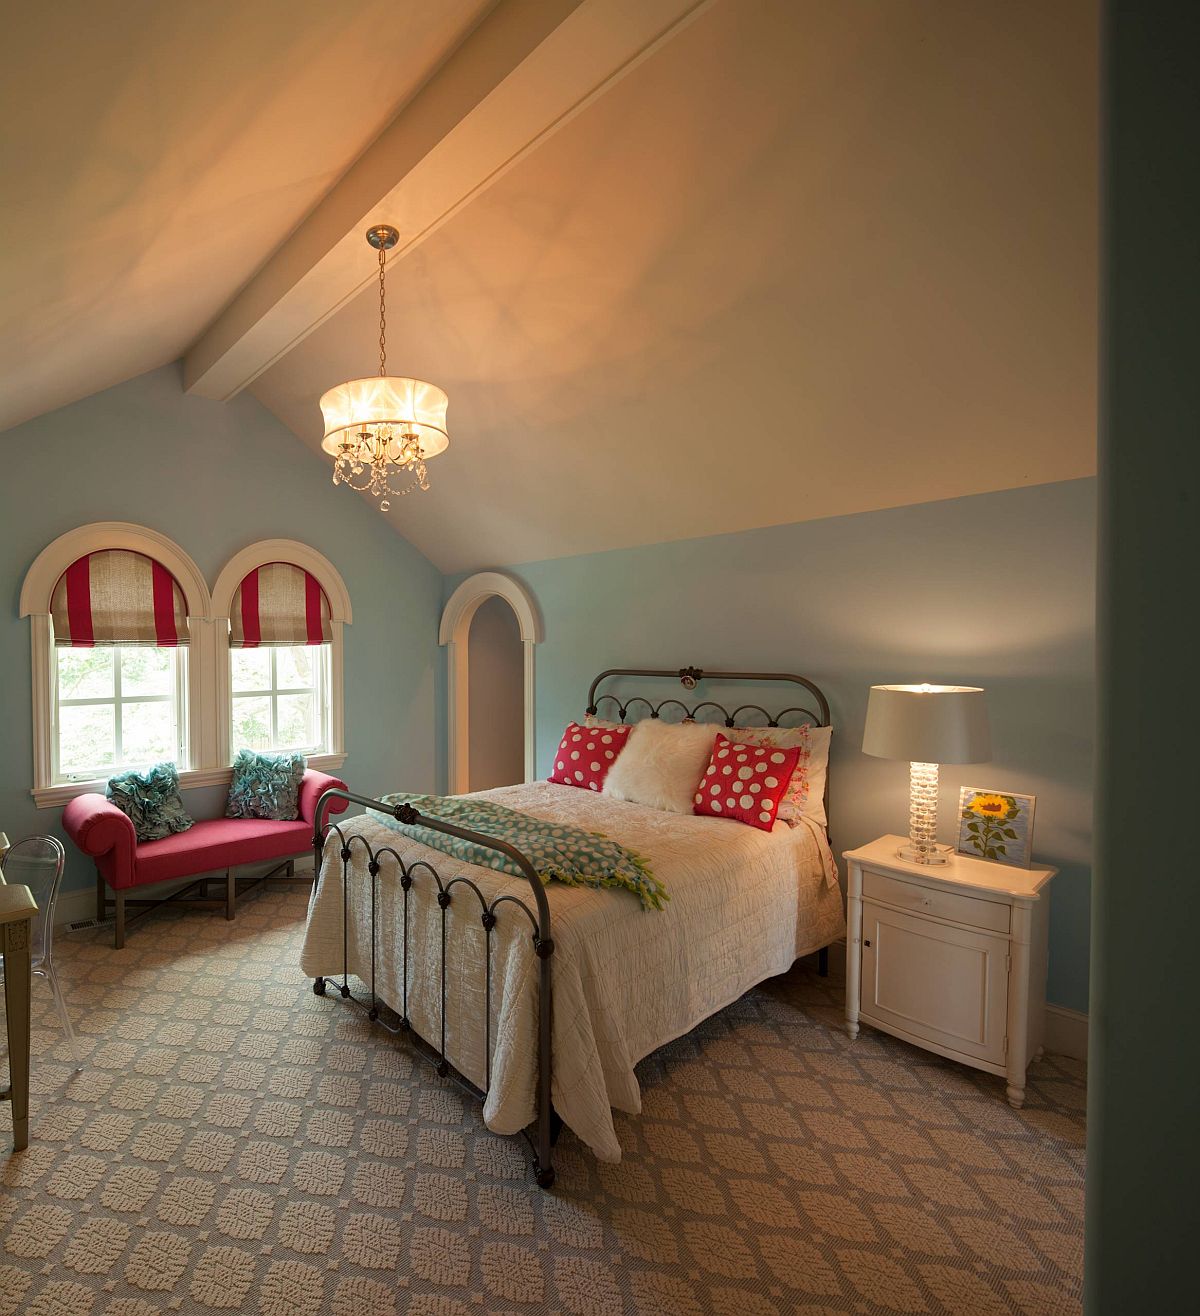 Traditional attic bedroom wih arched windows feels cozy and classic